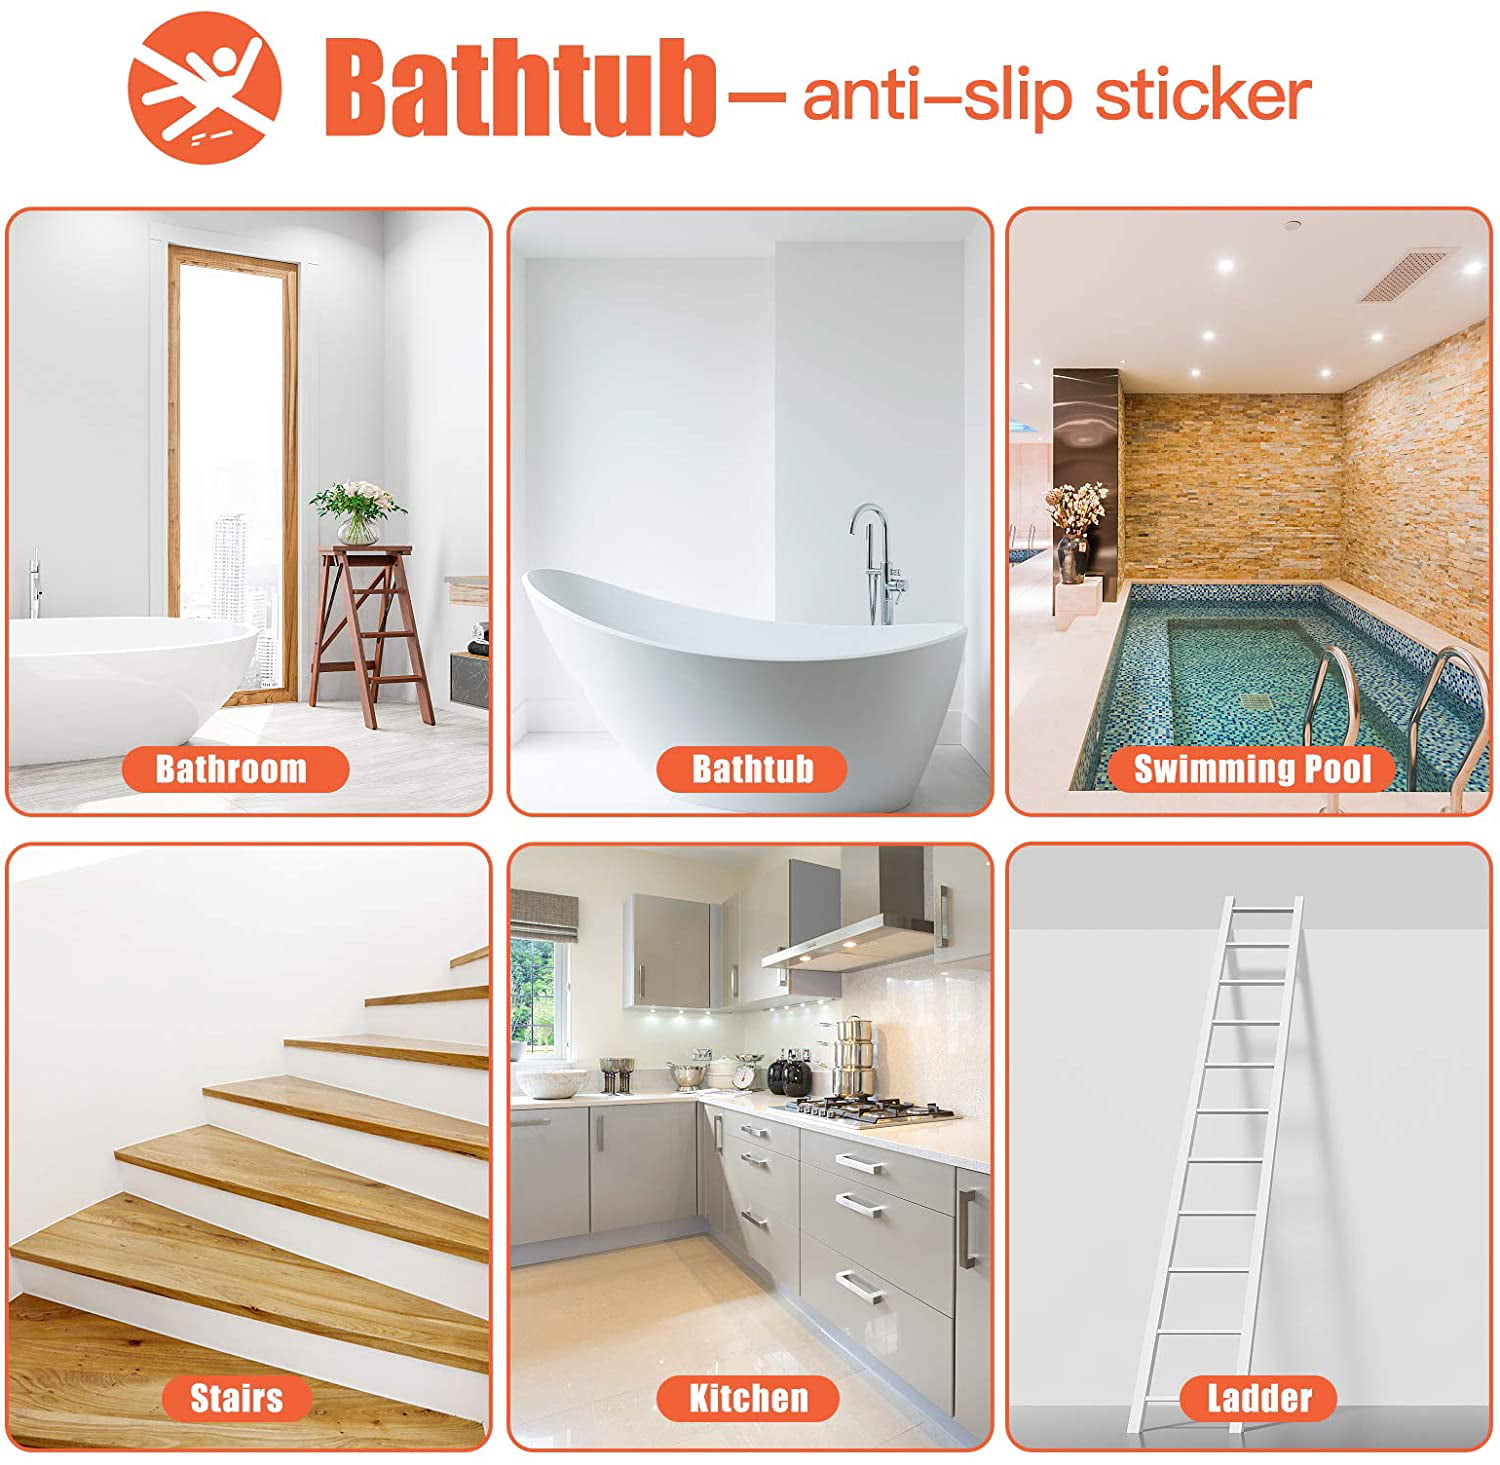 17 Pcs Bath Non Slip Stickers Shower Stickers Bath Safety Strip with Scraper for Pools Stairs Kitchen Bathtubs Bathroom Floors 